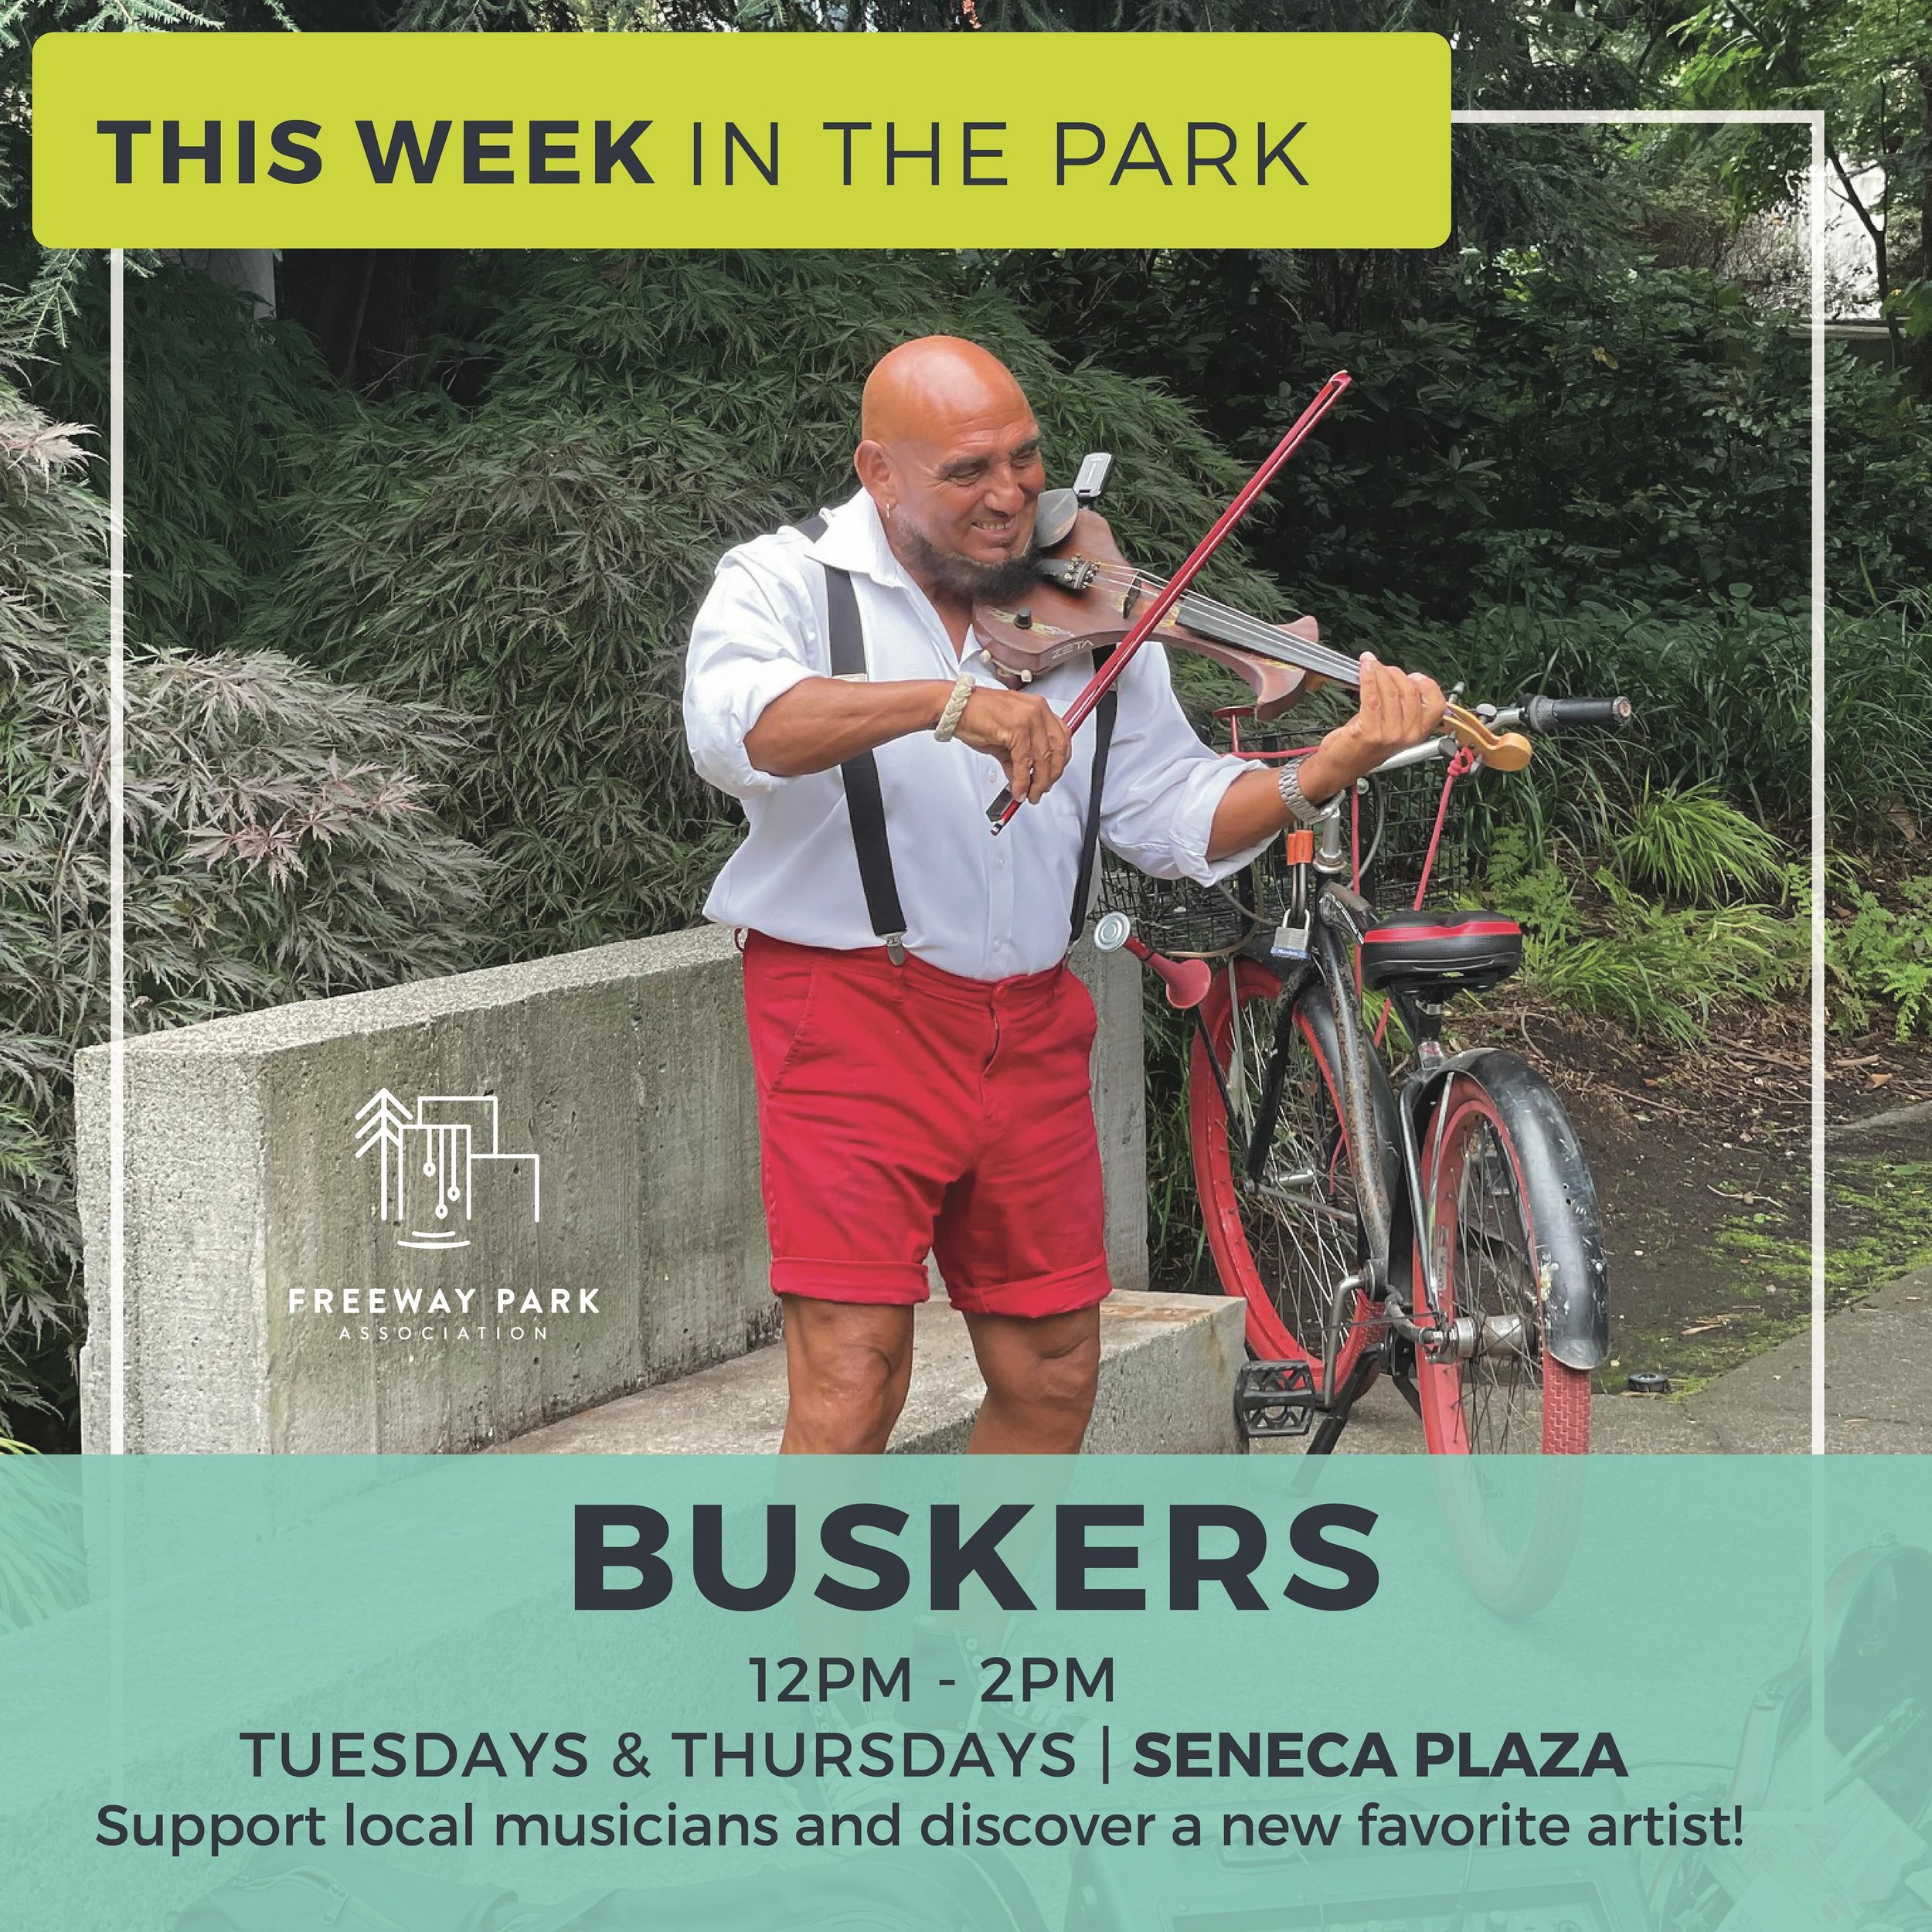 Come for the tunes, stay for the dance party! Buskers are back in the Park on Tuesdays and Thursdays through May and then M-F starting in June. @seattleparksandrec